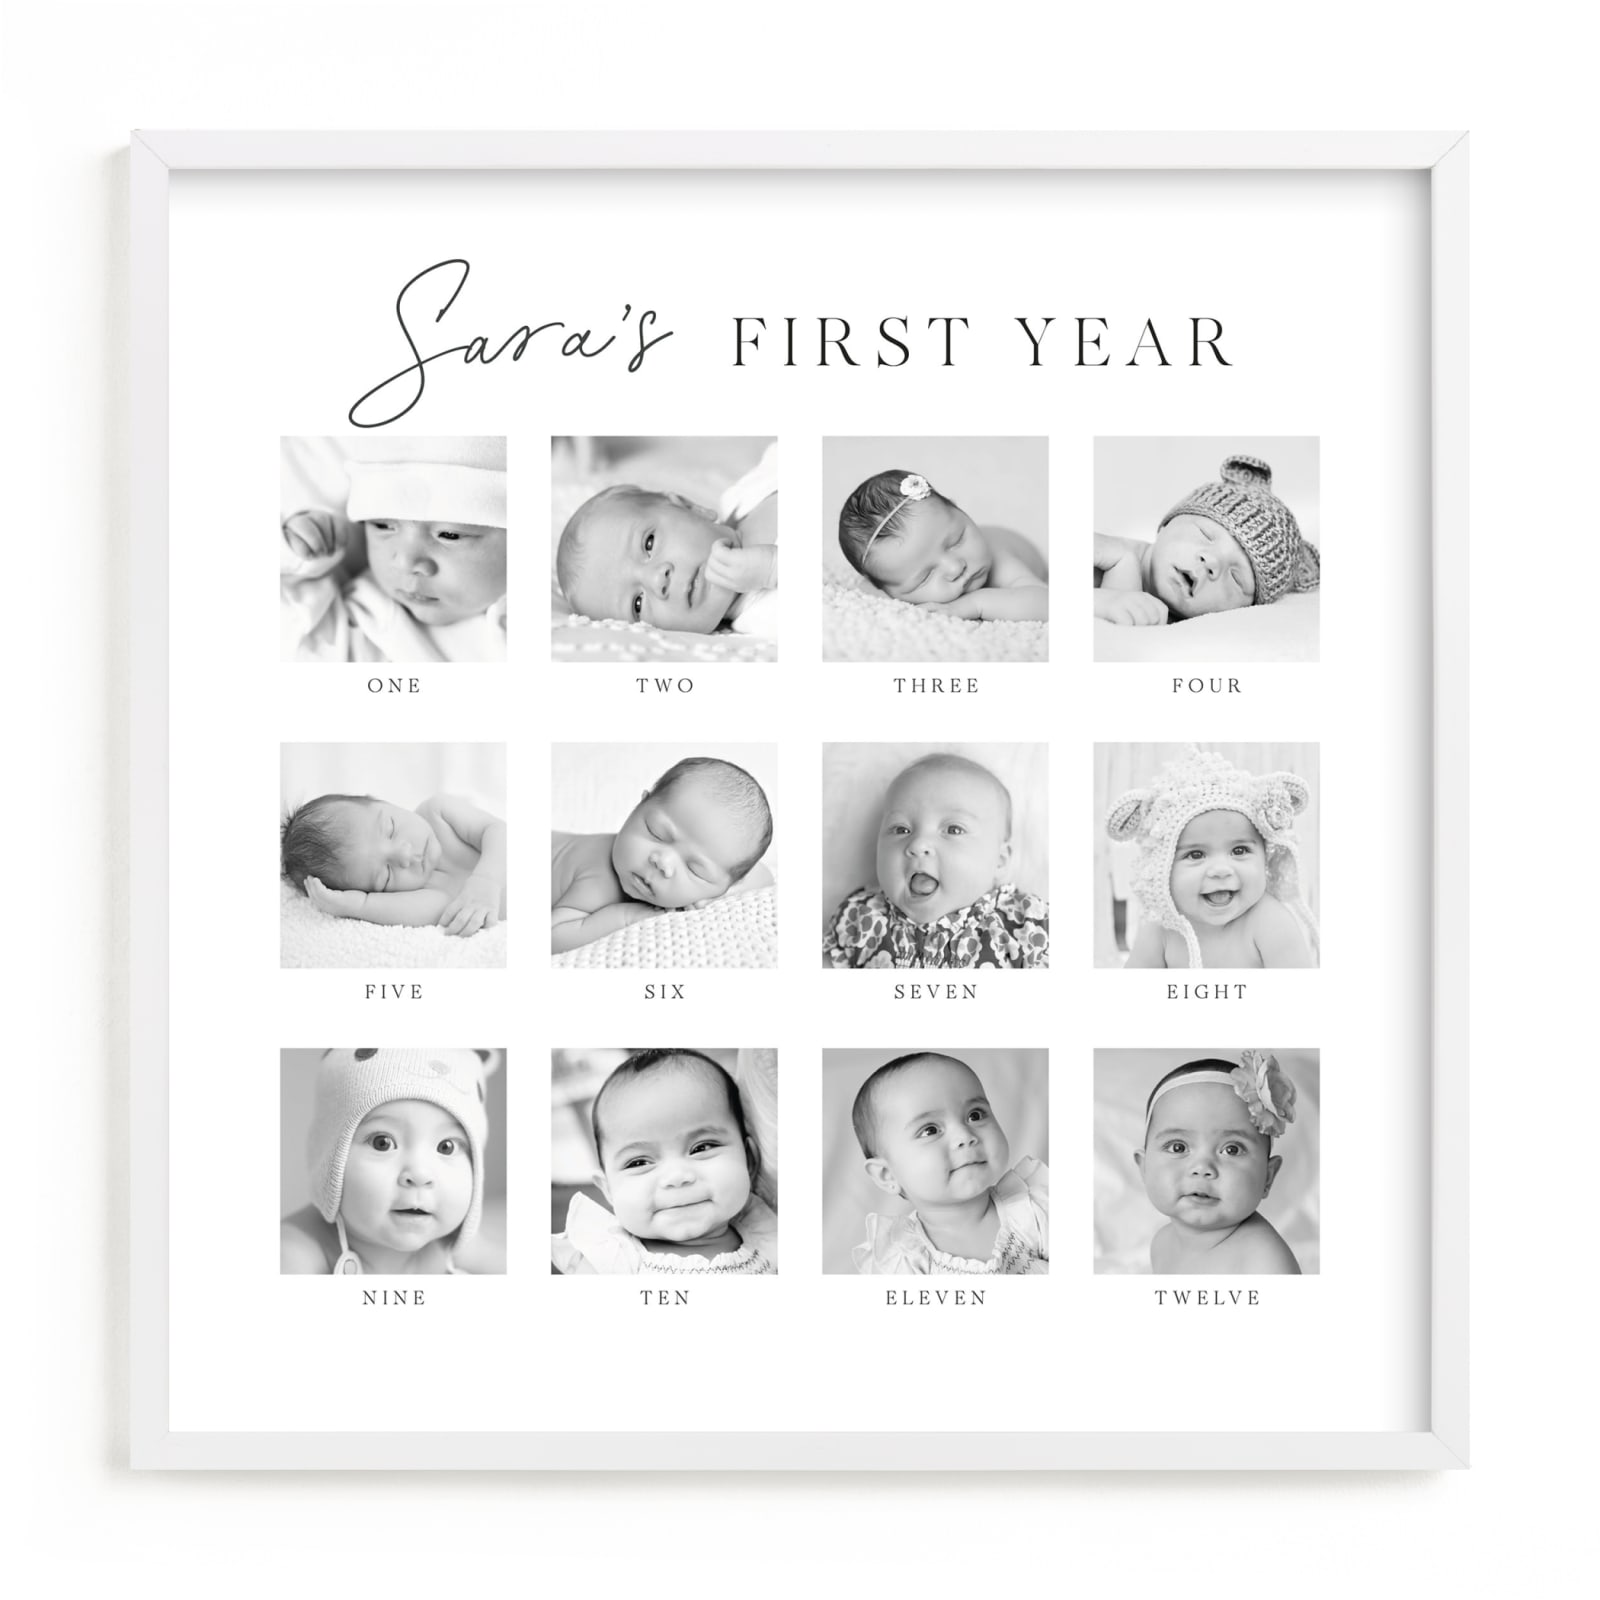 This is a black and white photo art by Erin Deegan called Baby's First Year.